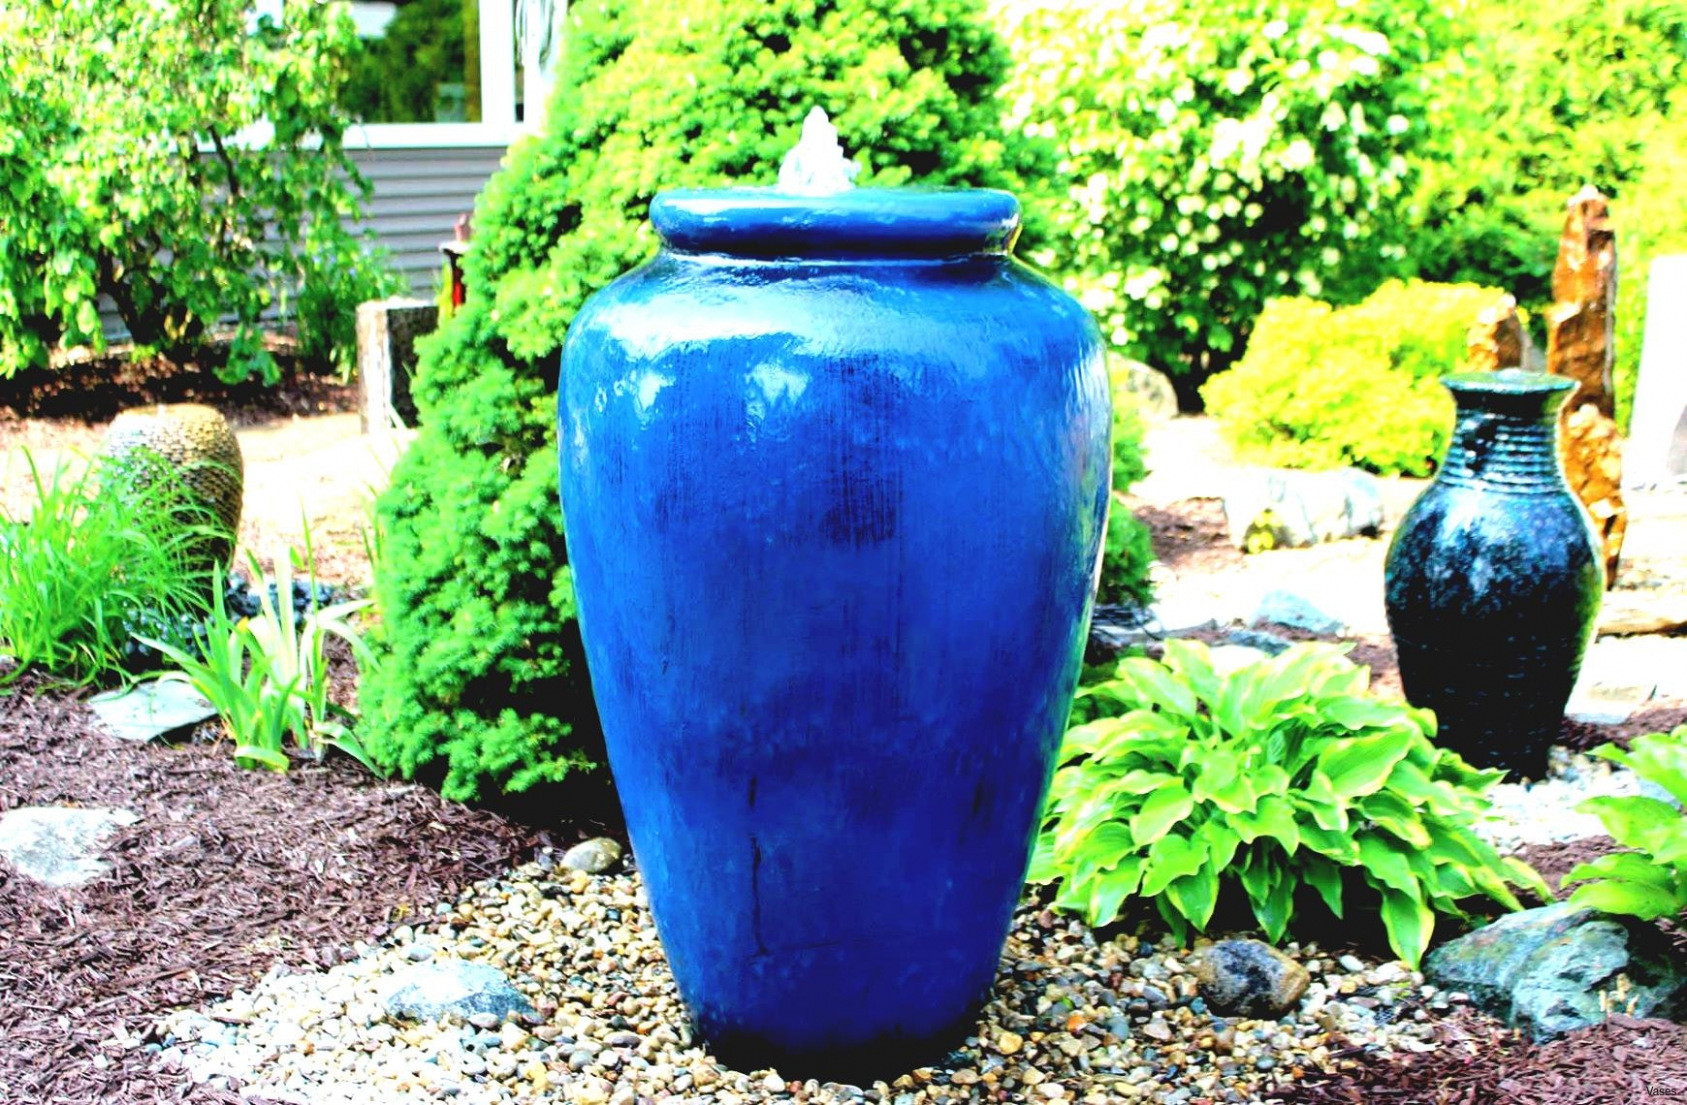 24 Unique Big Vases for Sale 2024 free download big vases for sale of 29 gorgeous outdoor garden water fountain base grow new creativity inside fountain nozzle heads pond pumps sprayh vases outdoor vase water fountains i 5dh 5d i 0d